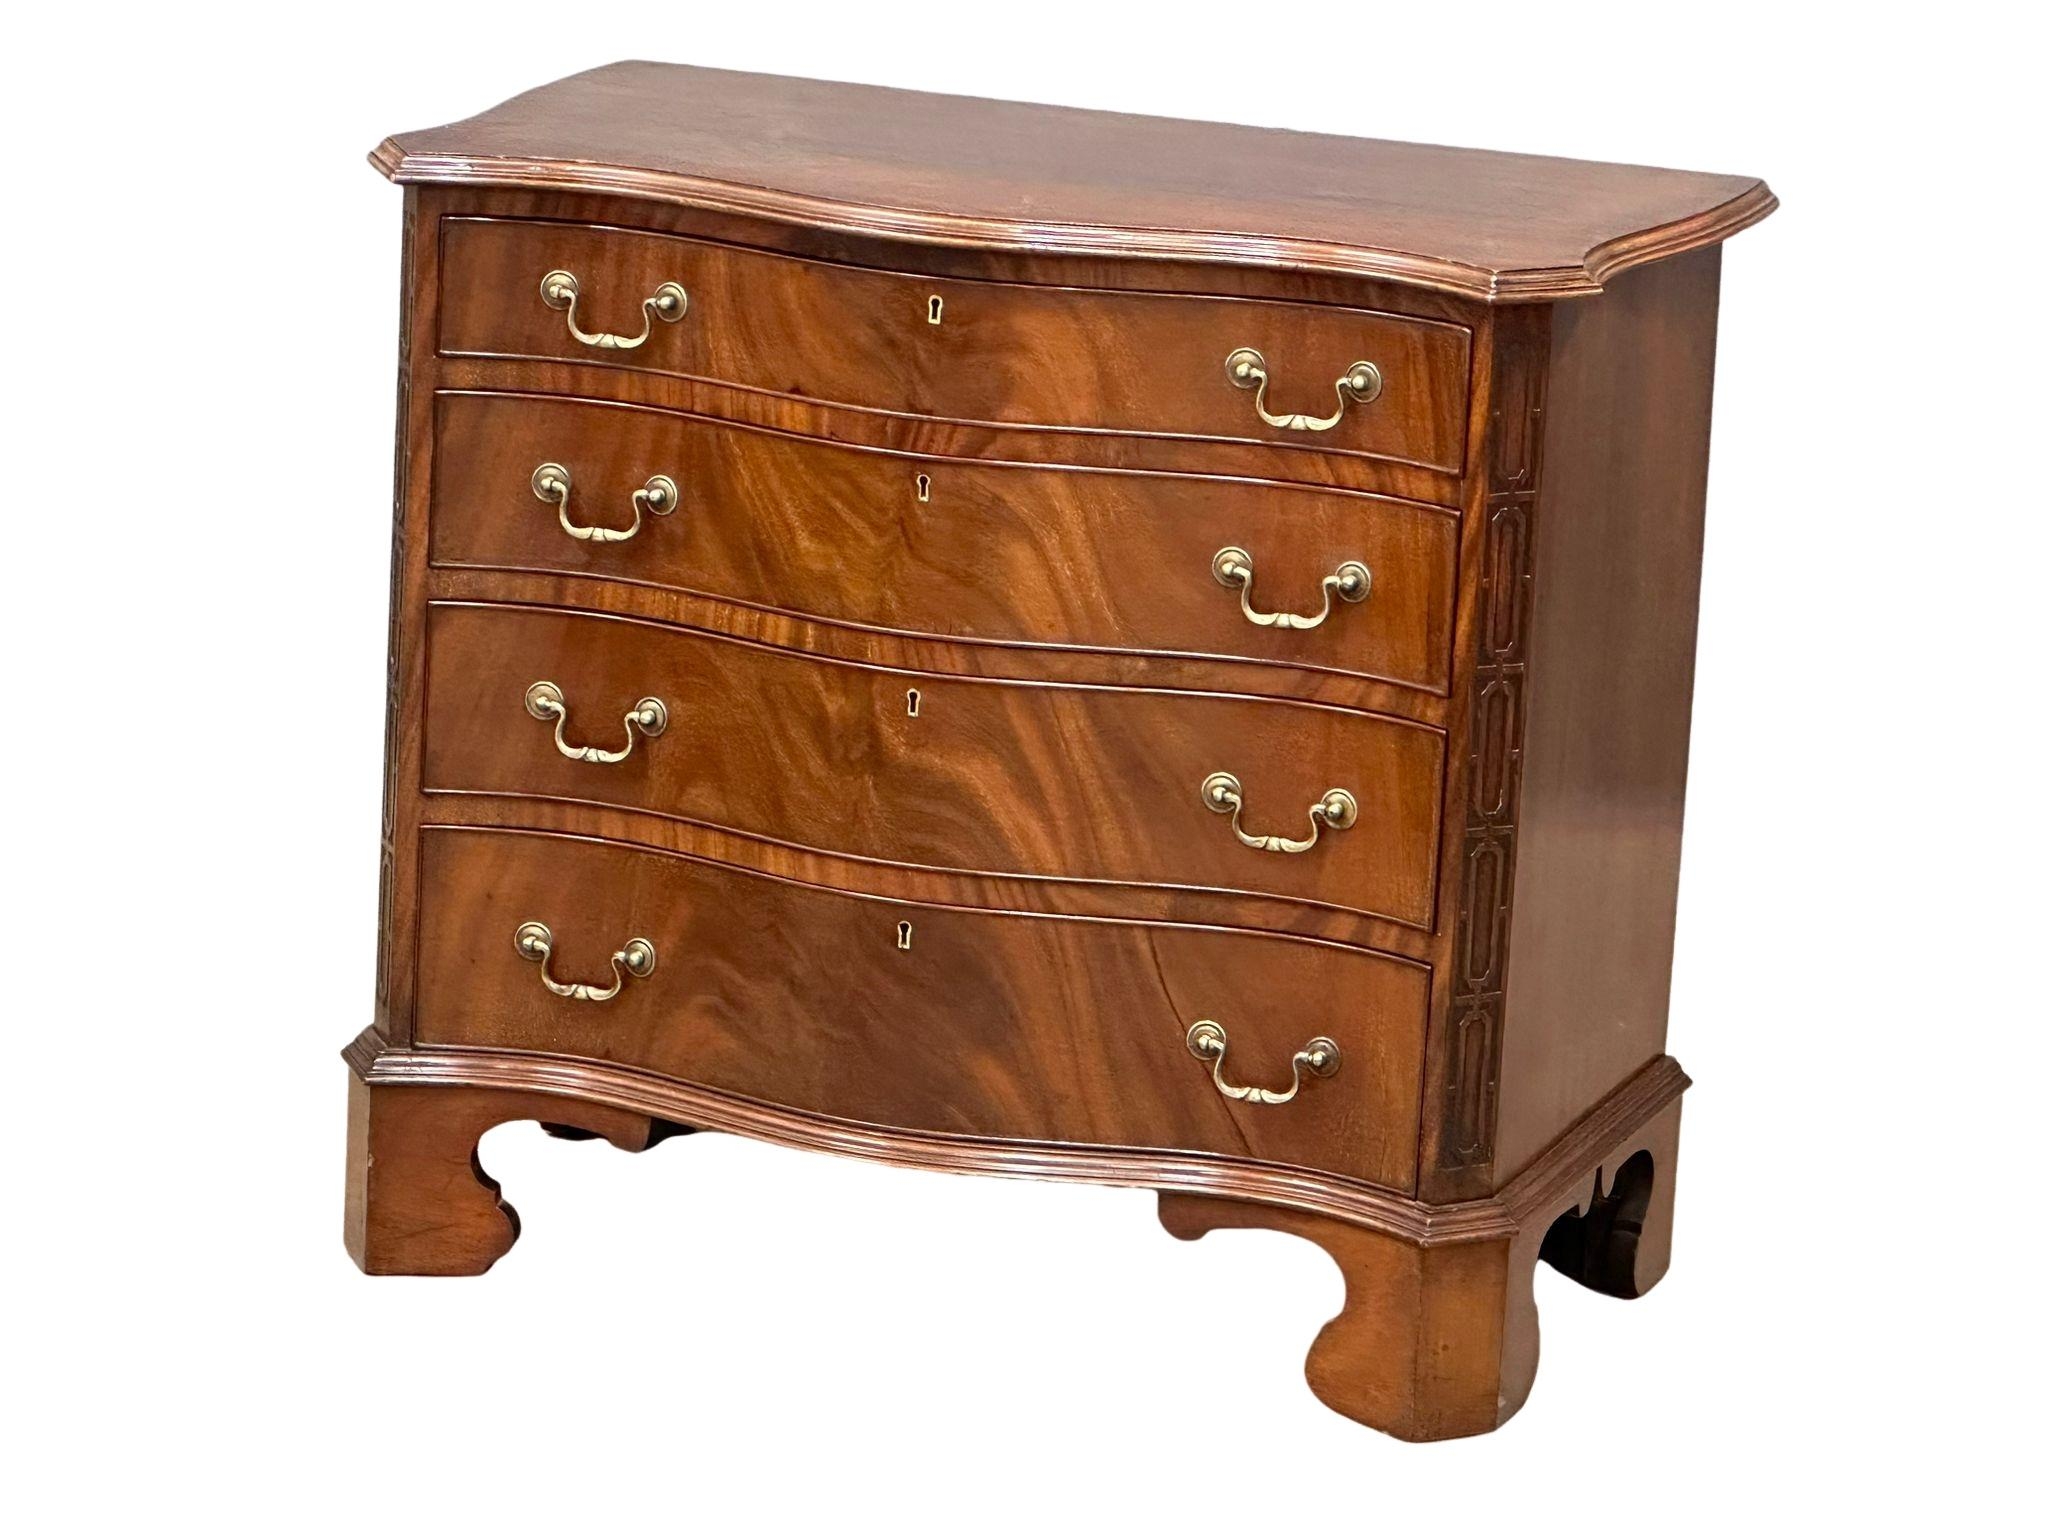 A good quality late 19th century Chippendale Revival mahogany serpentine front chest of drawers.